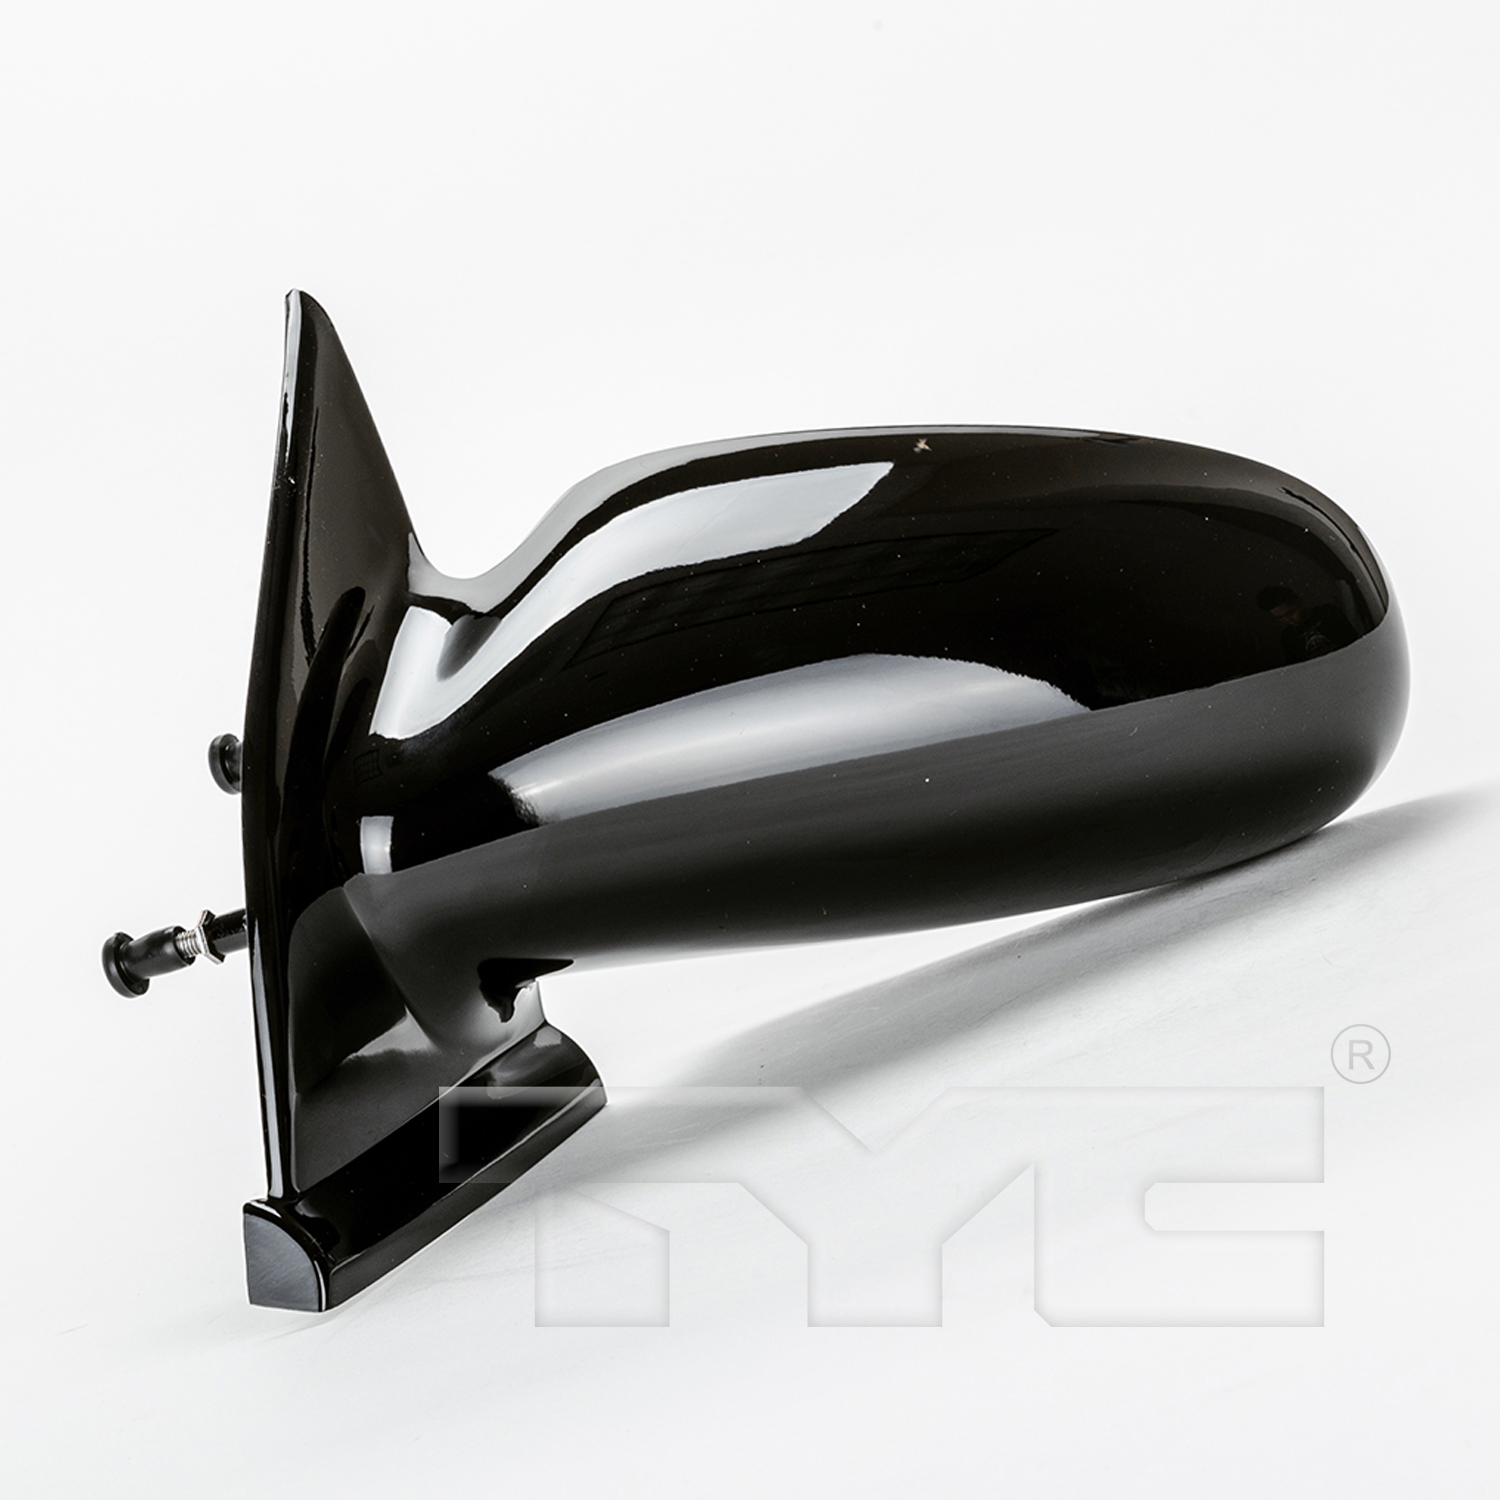 Aftermarket MIRRORS for SATURN - SL2, SL2,96-02,LT Mirror outside rear view